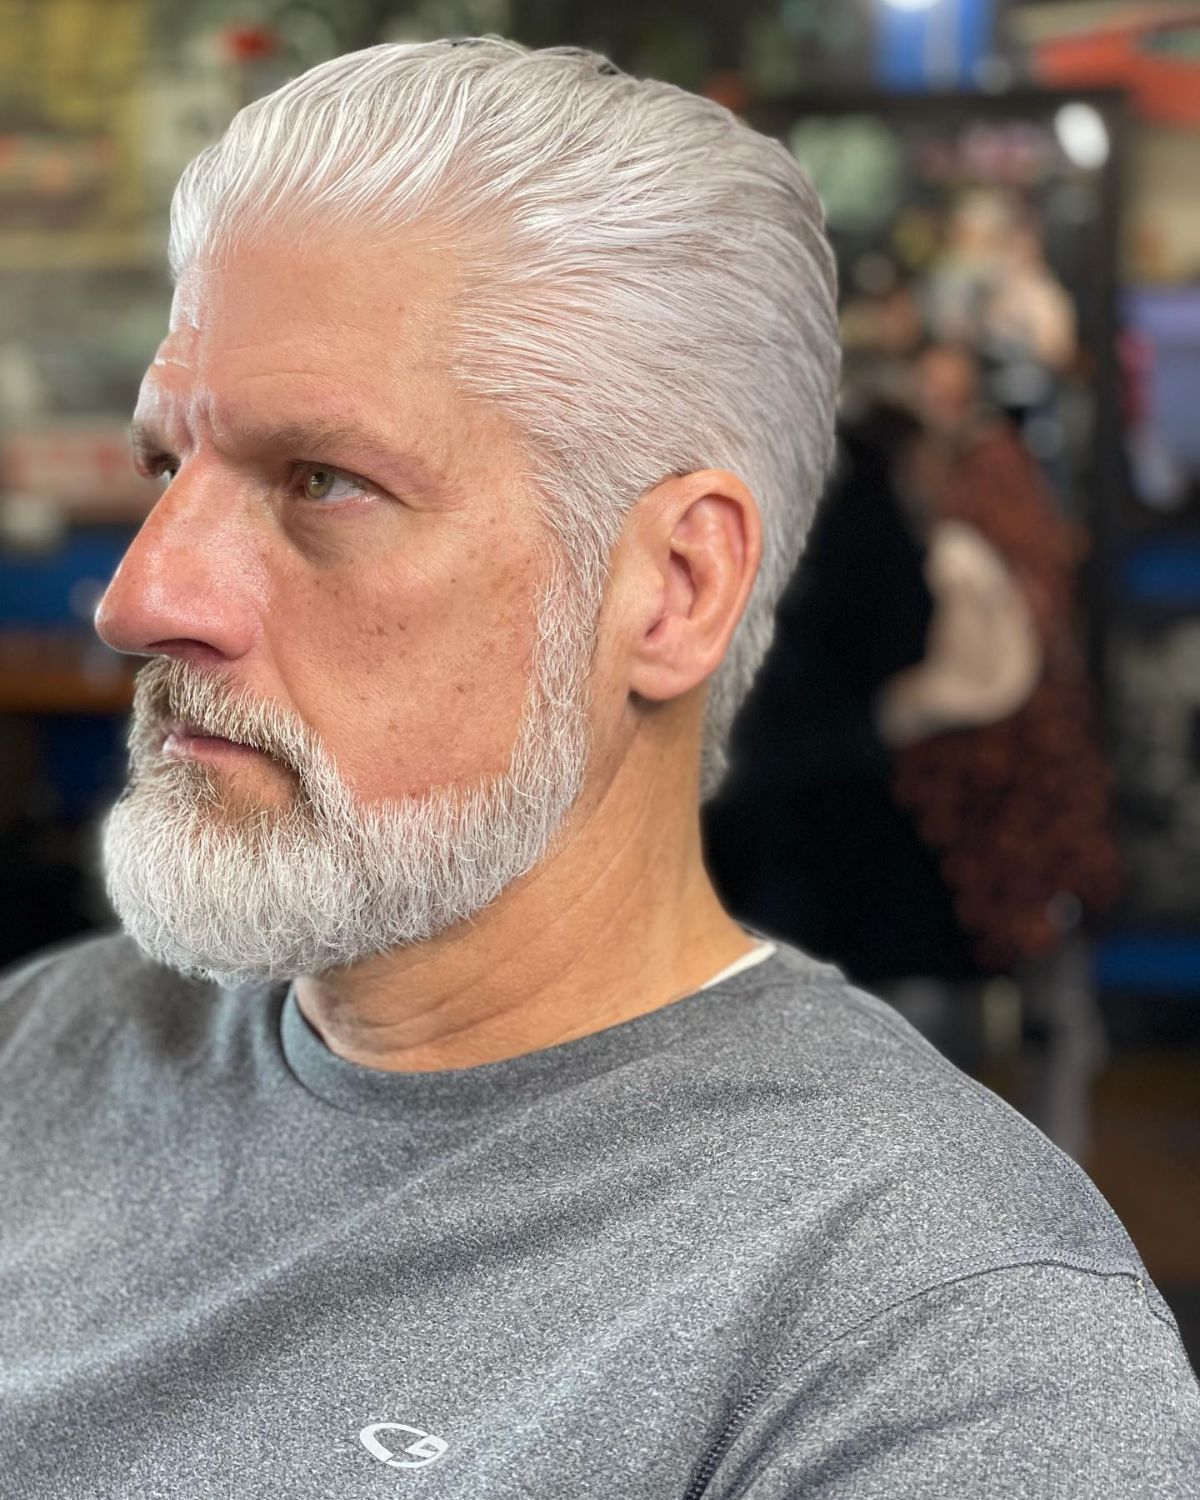 Hairstyles for Older Men With Thinning Hair From Hair MX